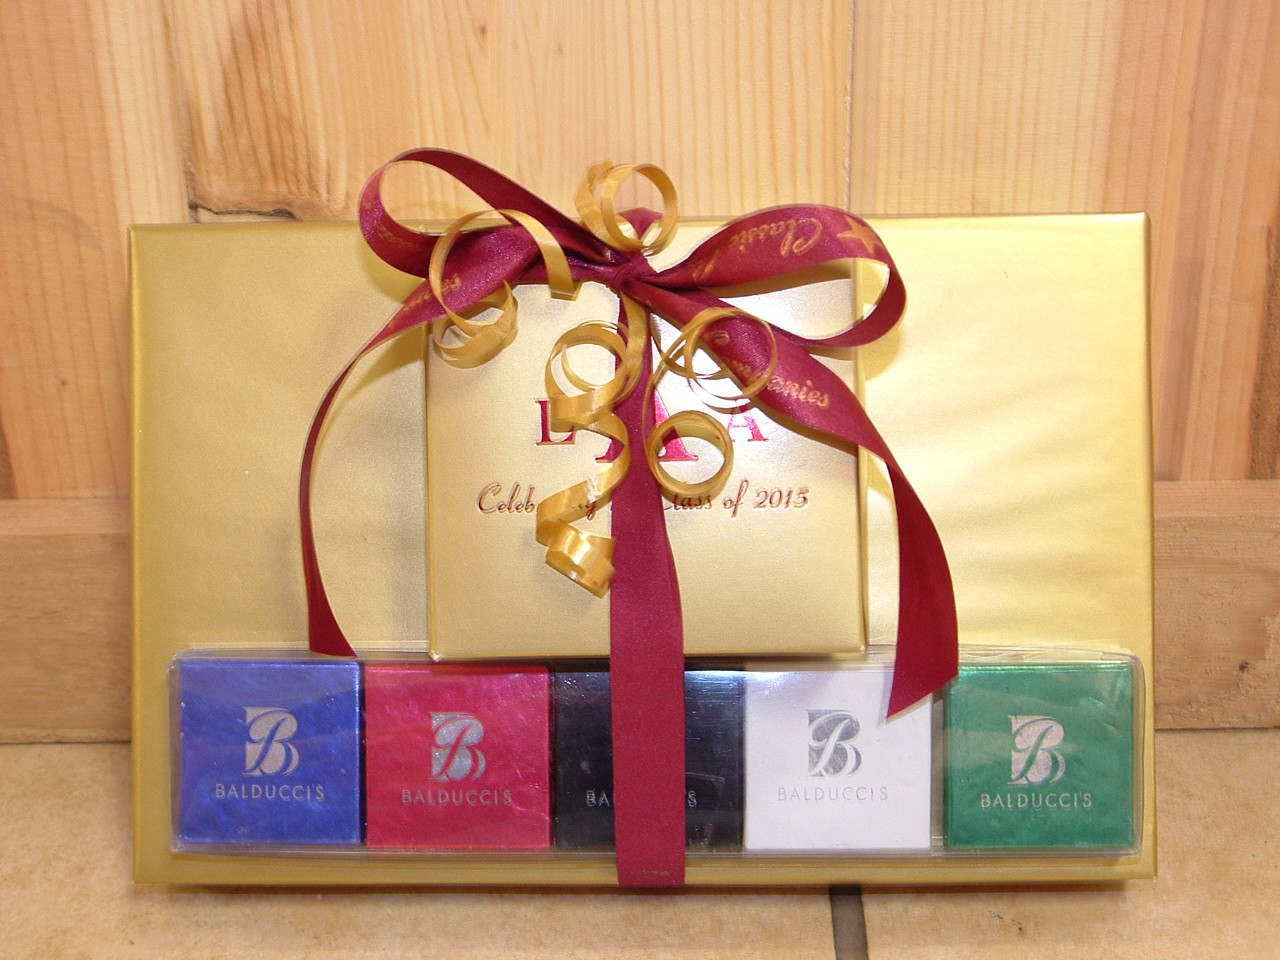 Company Holiday Gift Ideas
 Great Corporate Holiday Gift Ideas of Chocolate and or